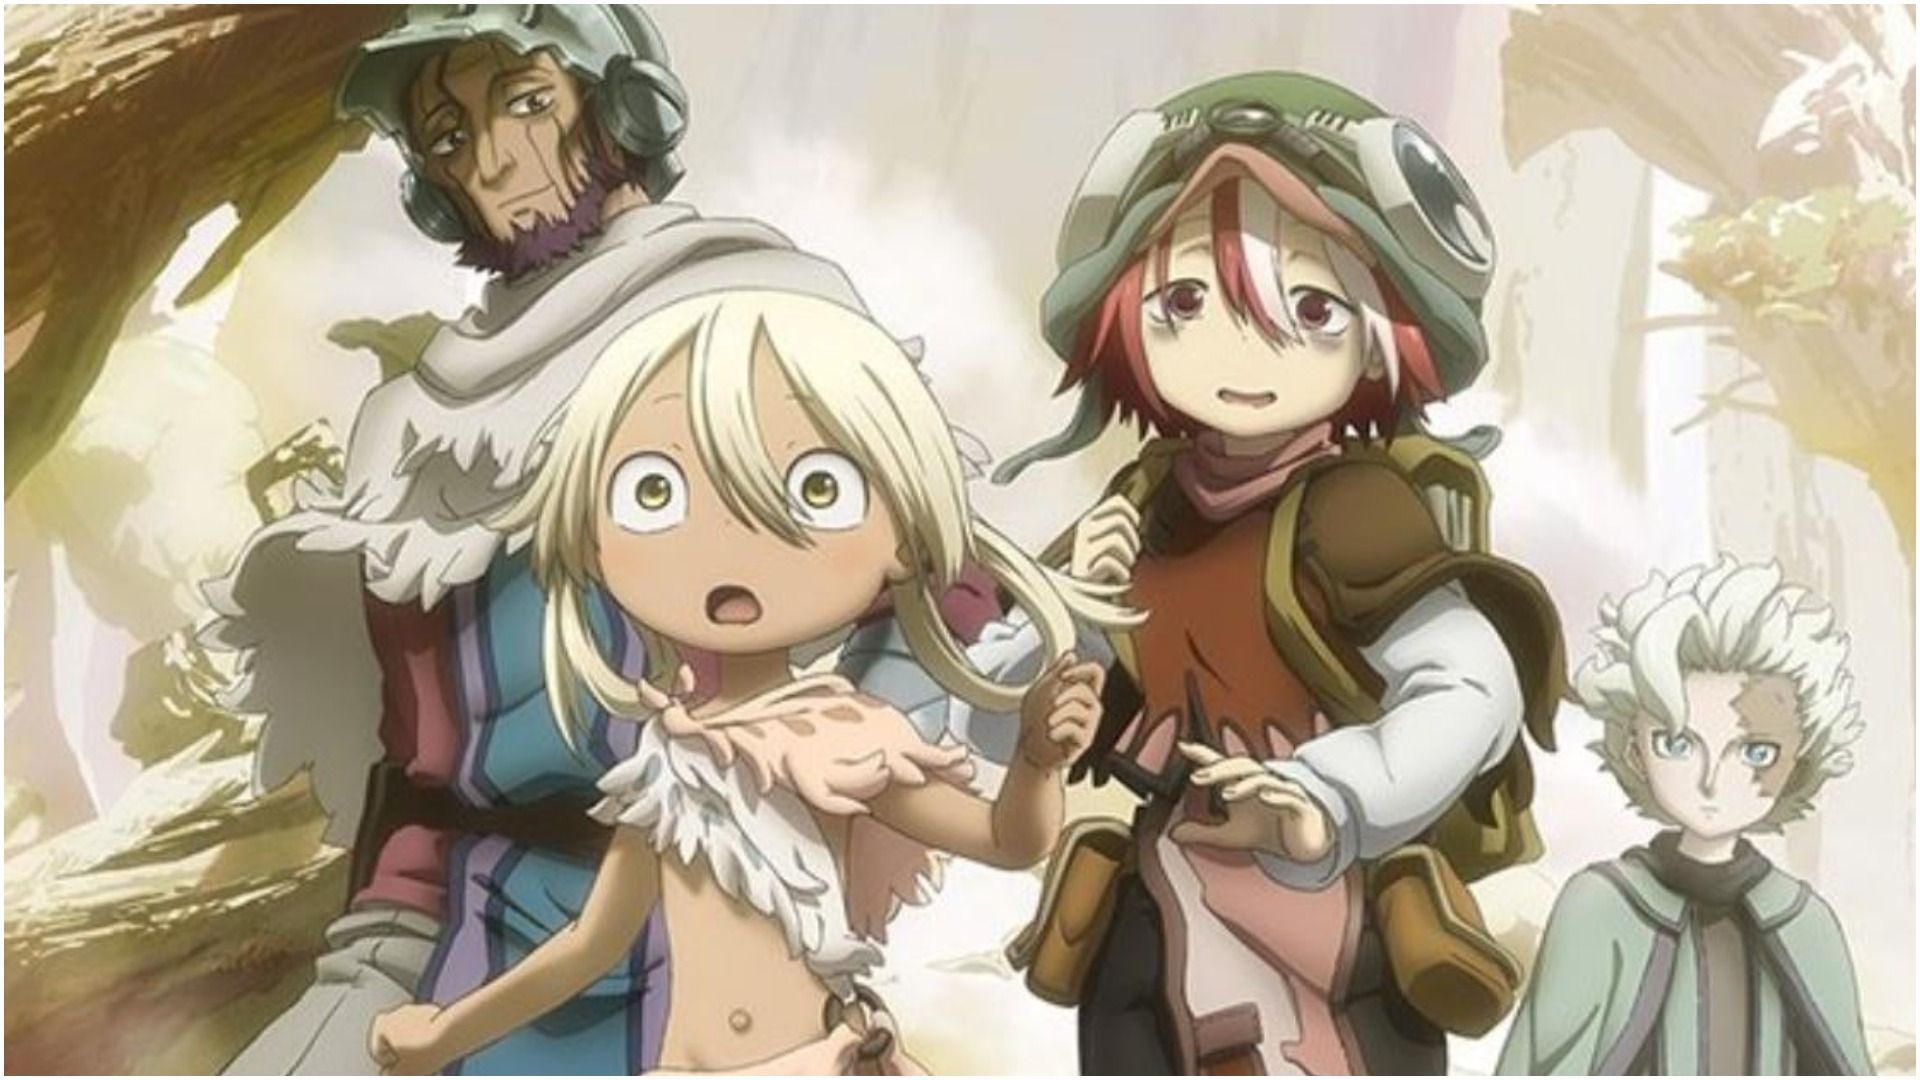 Made in Abyss: Season 2 details (Image via Kinema Citrus)